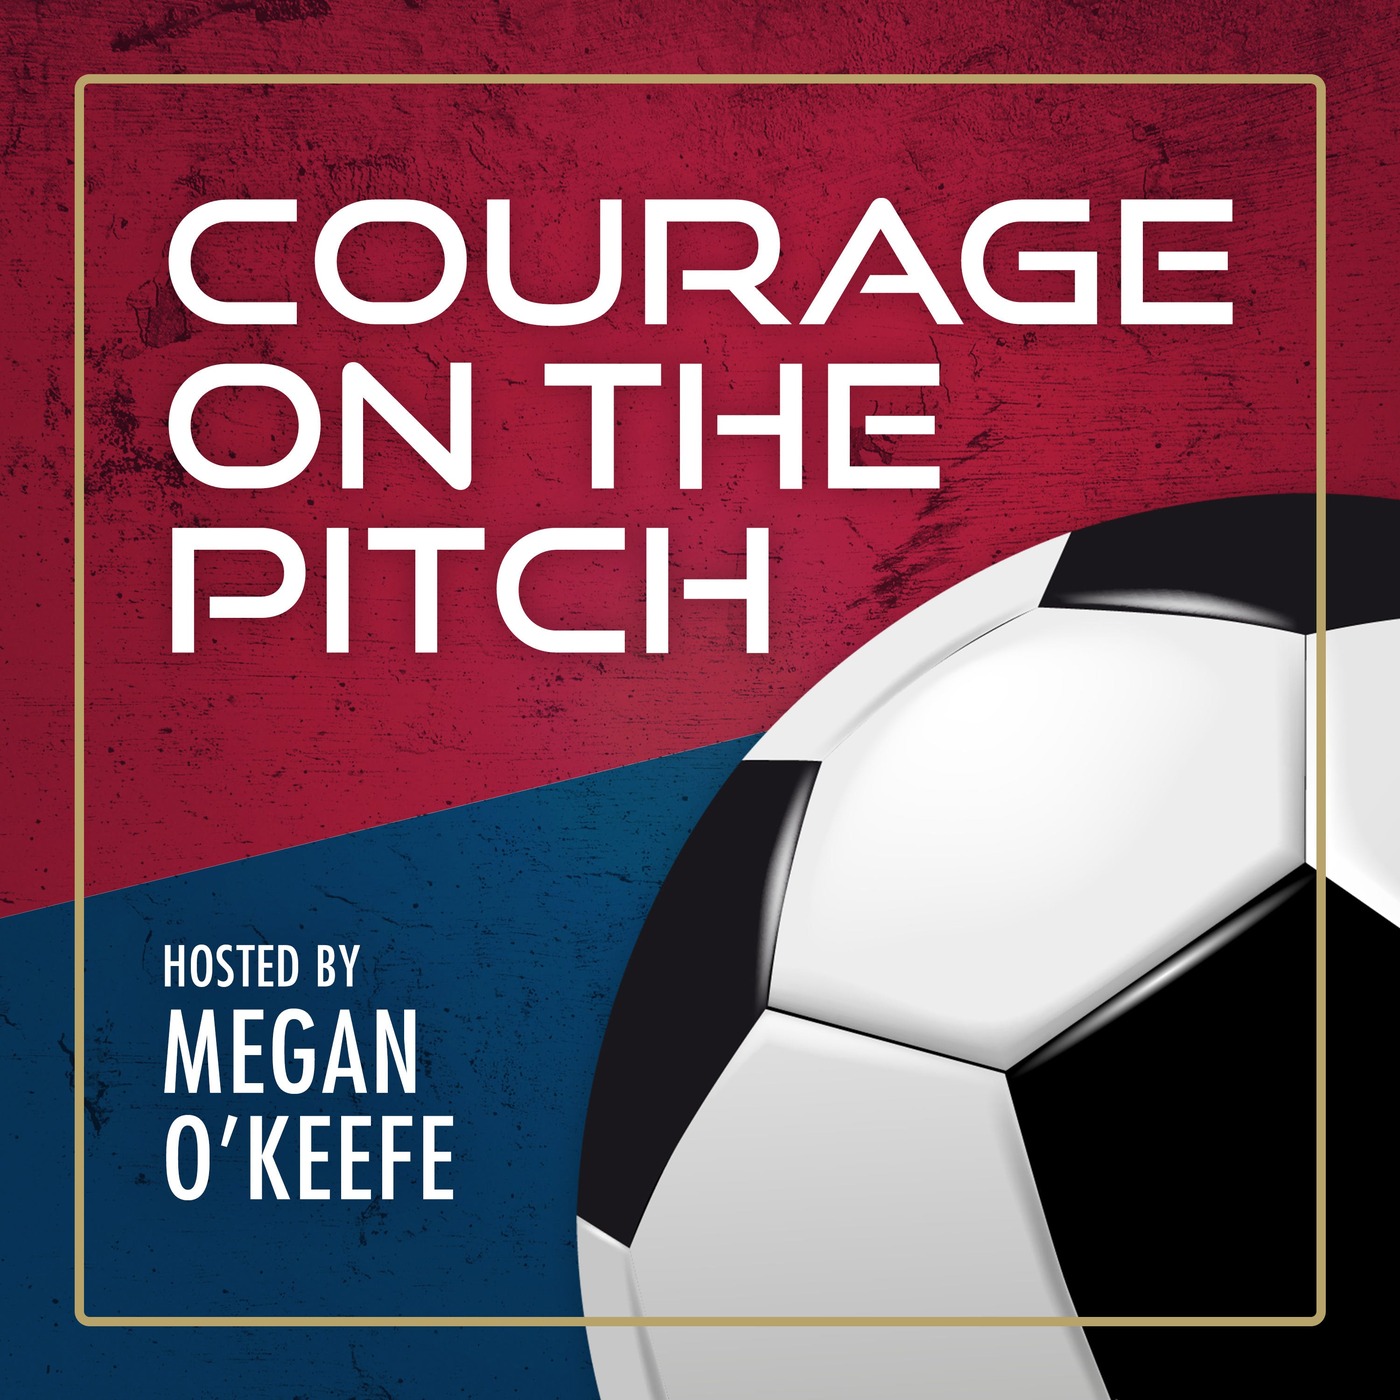 Courage on the Pitch - Emily Gray, NC Courage Rookie